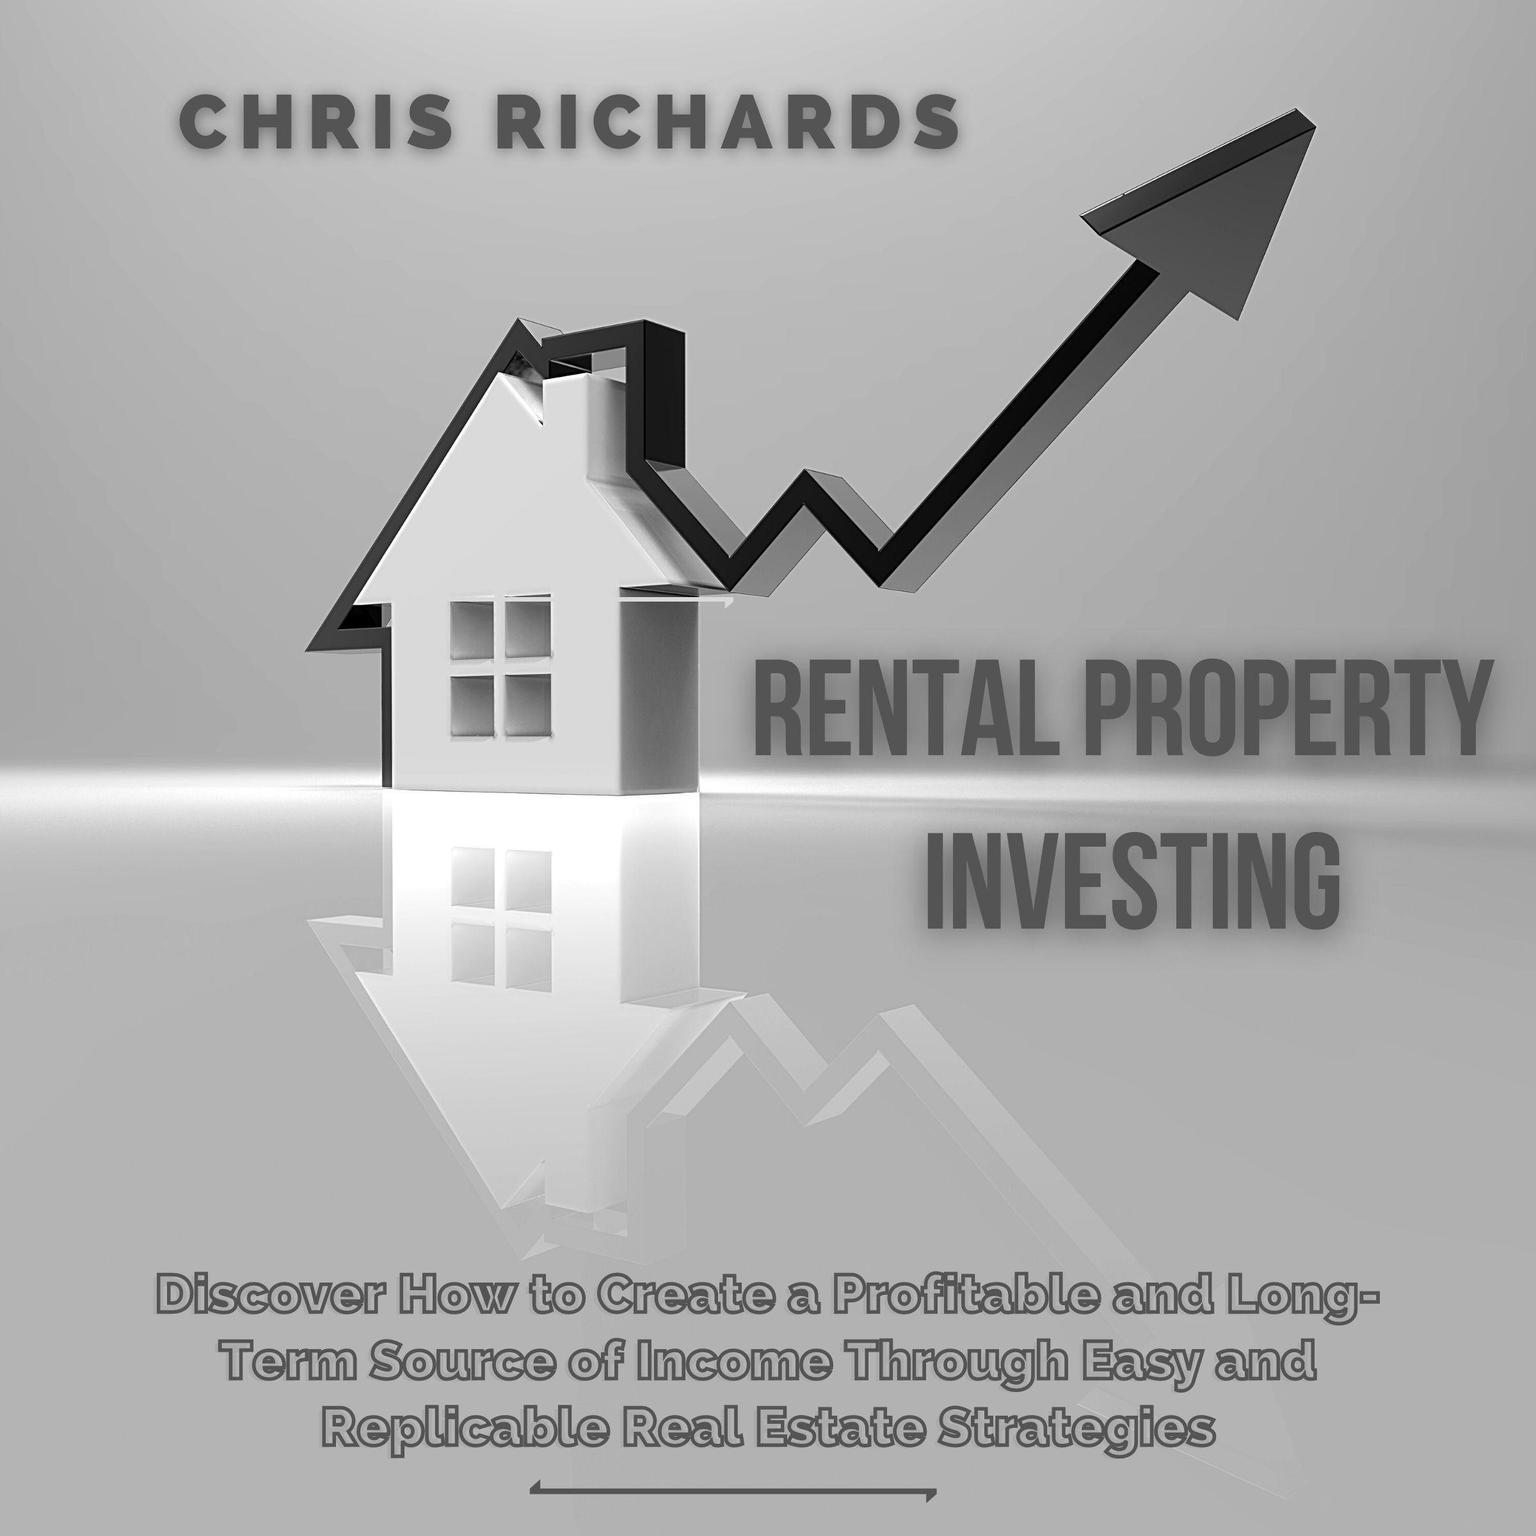 Rental Property Investing: Discover How to Create a Profitable and Long-Term Source of Income Through Easy and Replicable Real Estate Strategies Audiobook, by Chris Richards